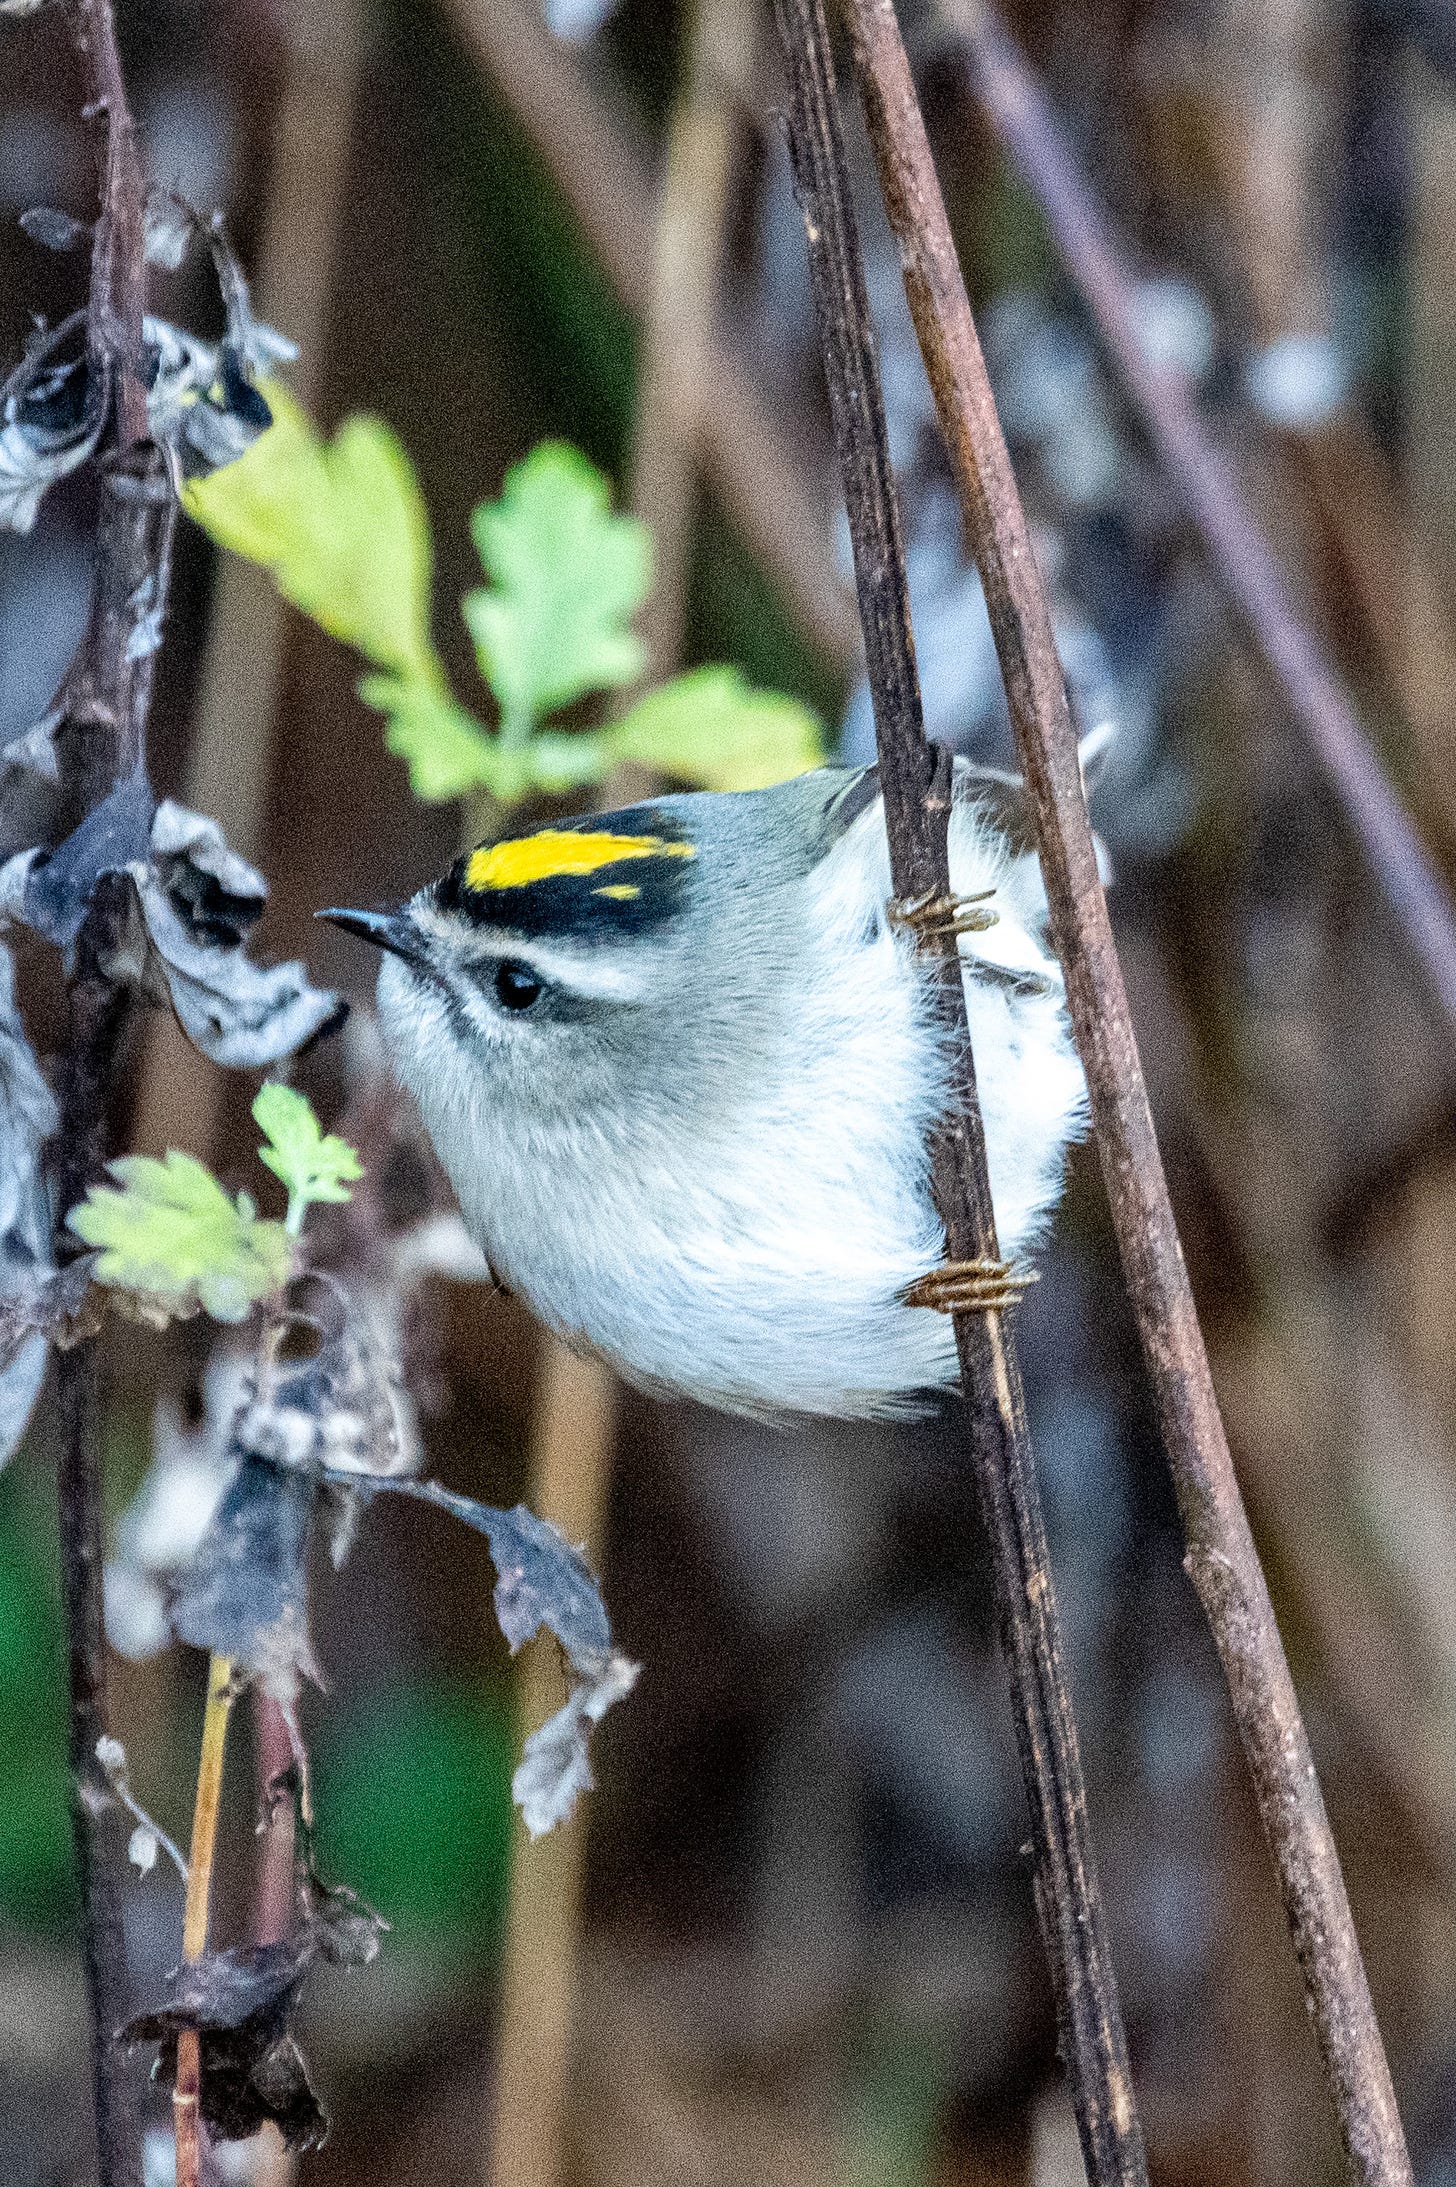 A golden-crowned kinglet, perched on a vertical stem, looks sideways